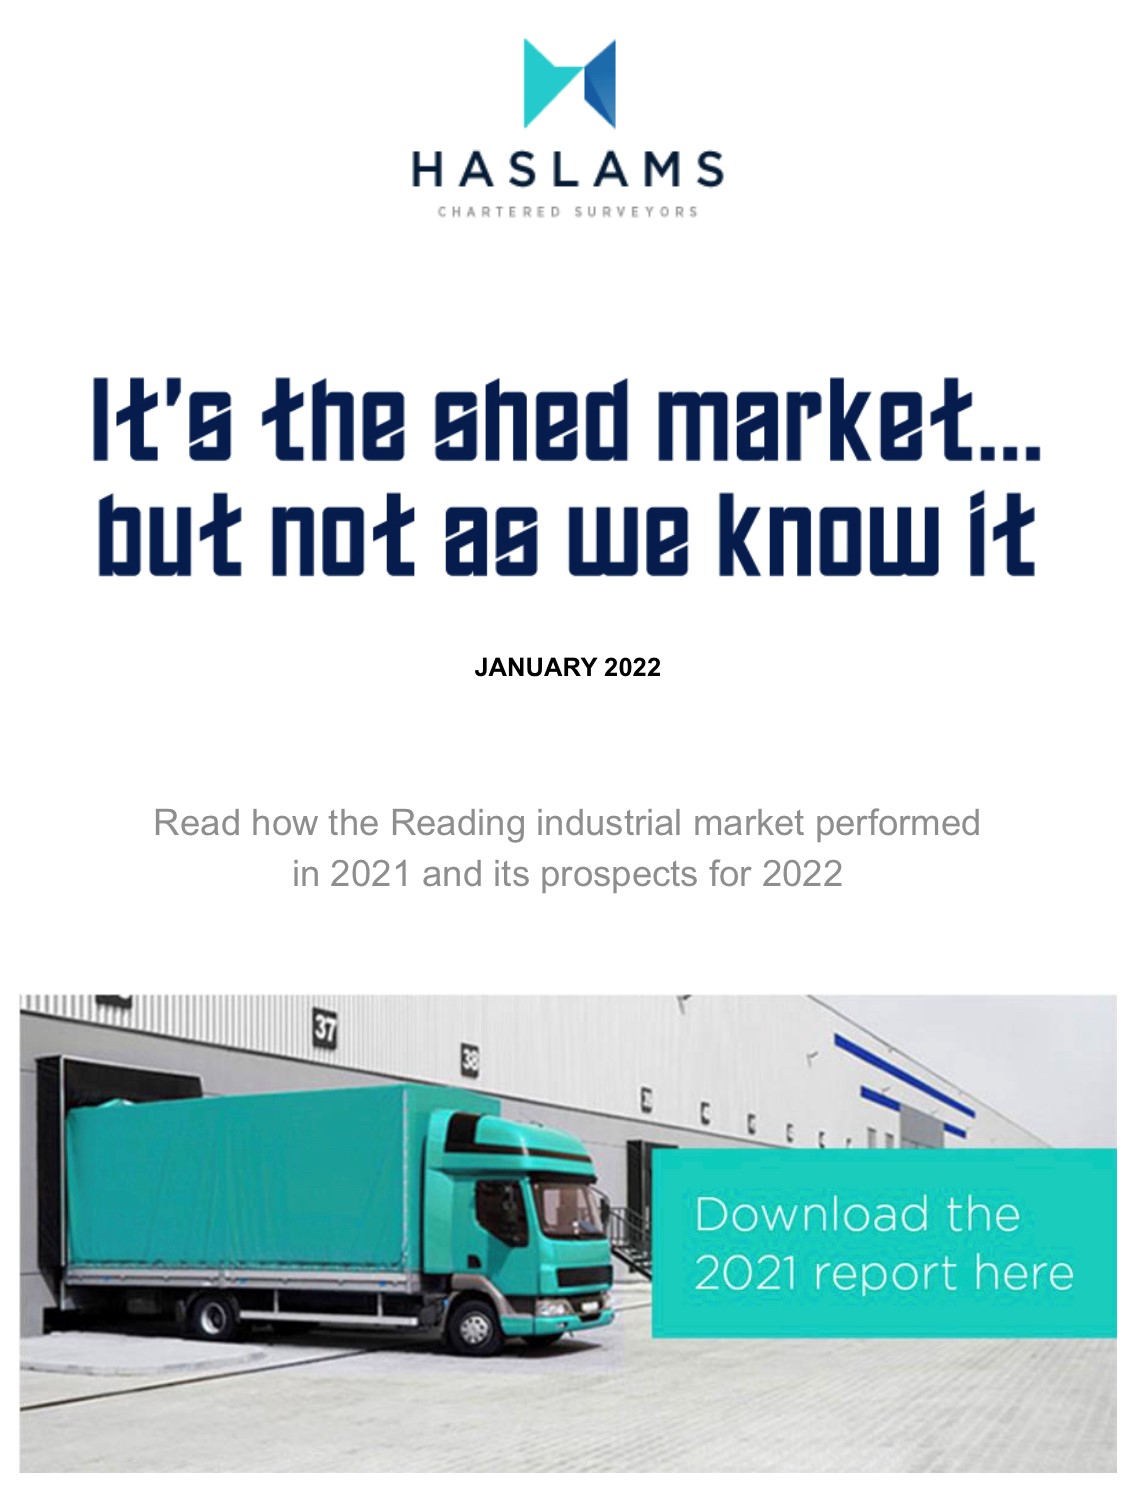 Hot off the press! Reading Industrial Market Report 2021